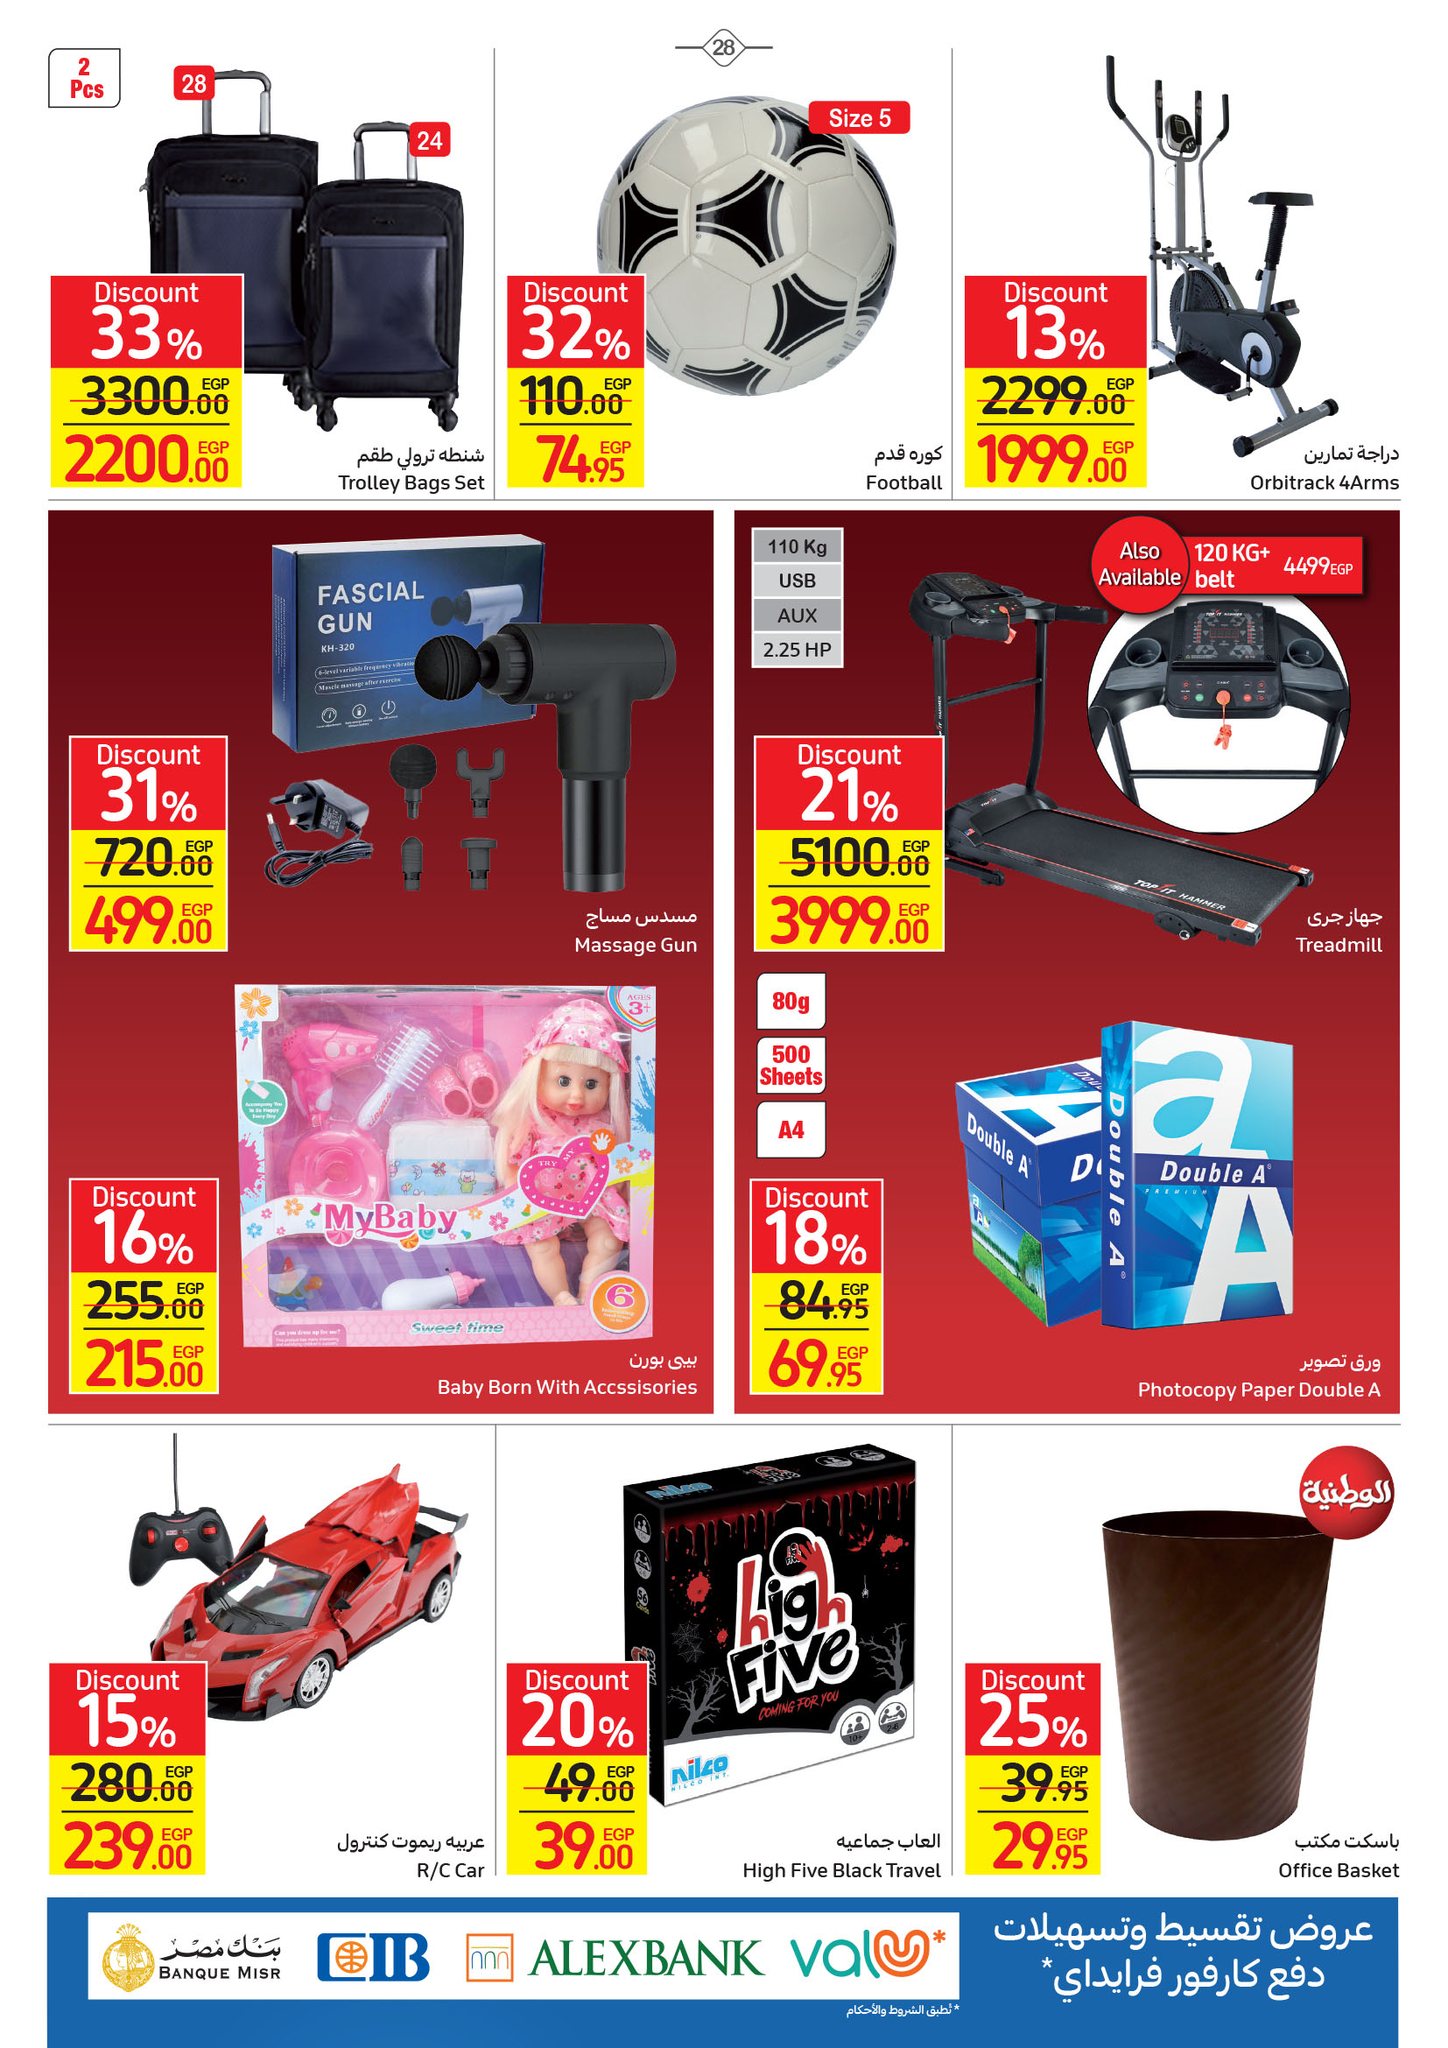 Watch the latest Carrefour half price offers "Last Chance Offer" until December 4 28